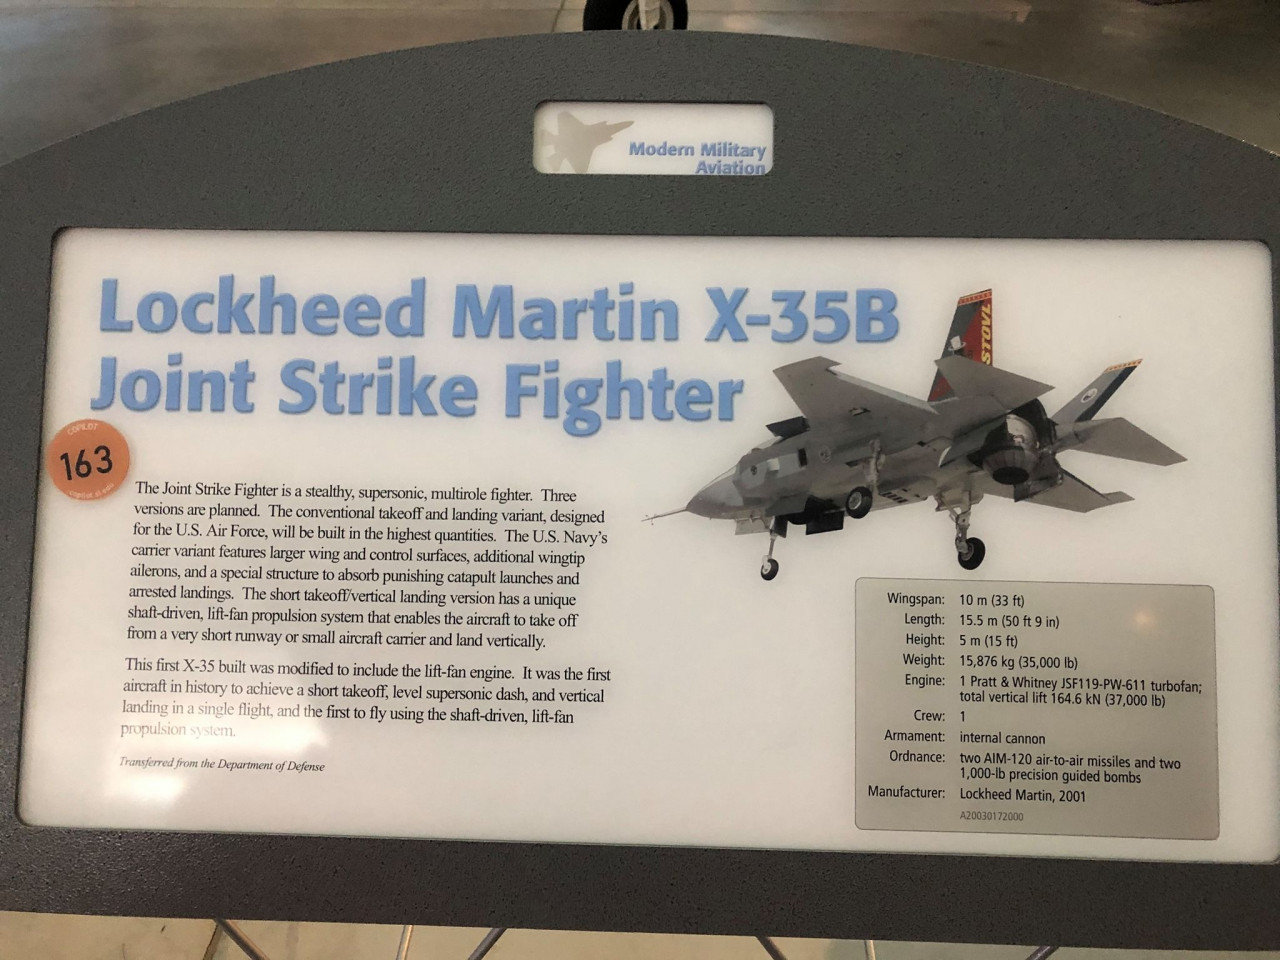 X-35B - Joint Strike Fighter